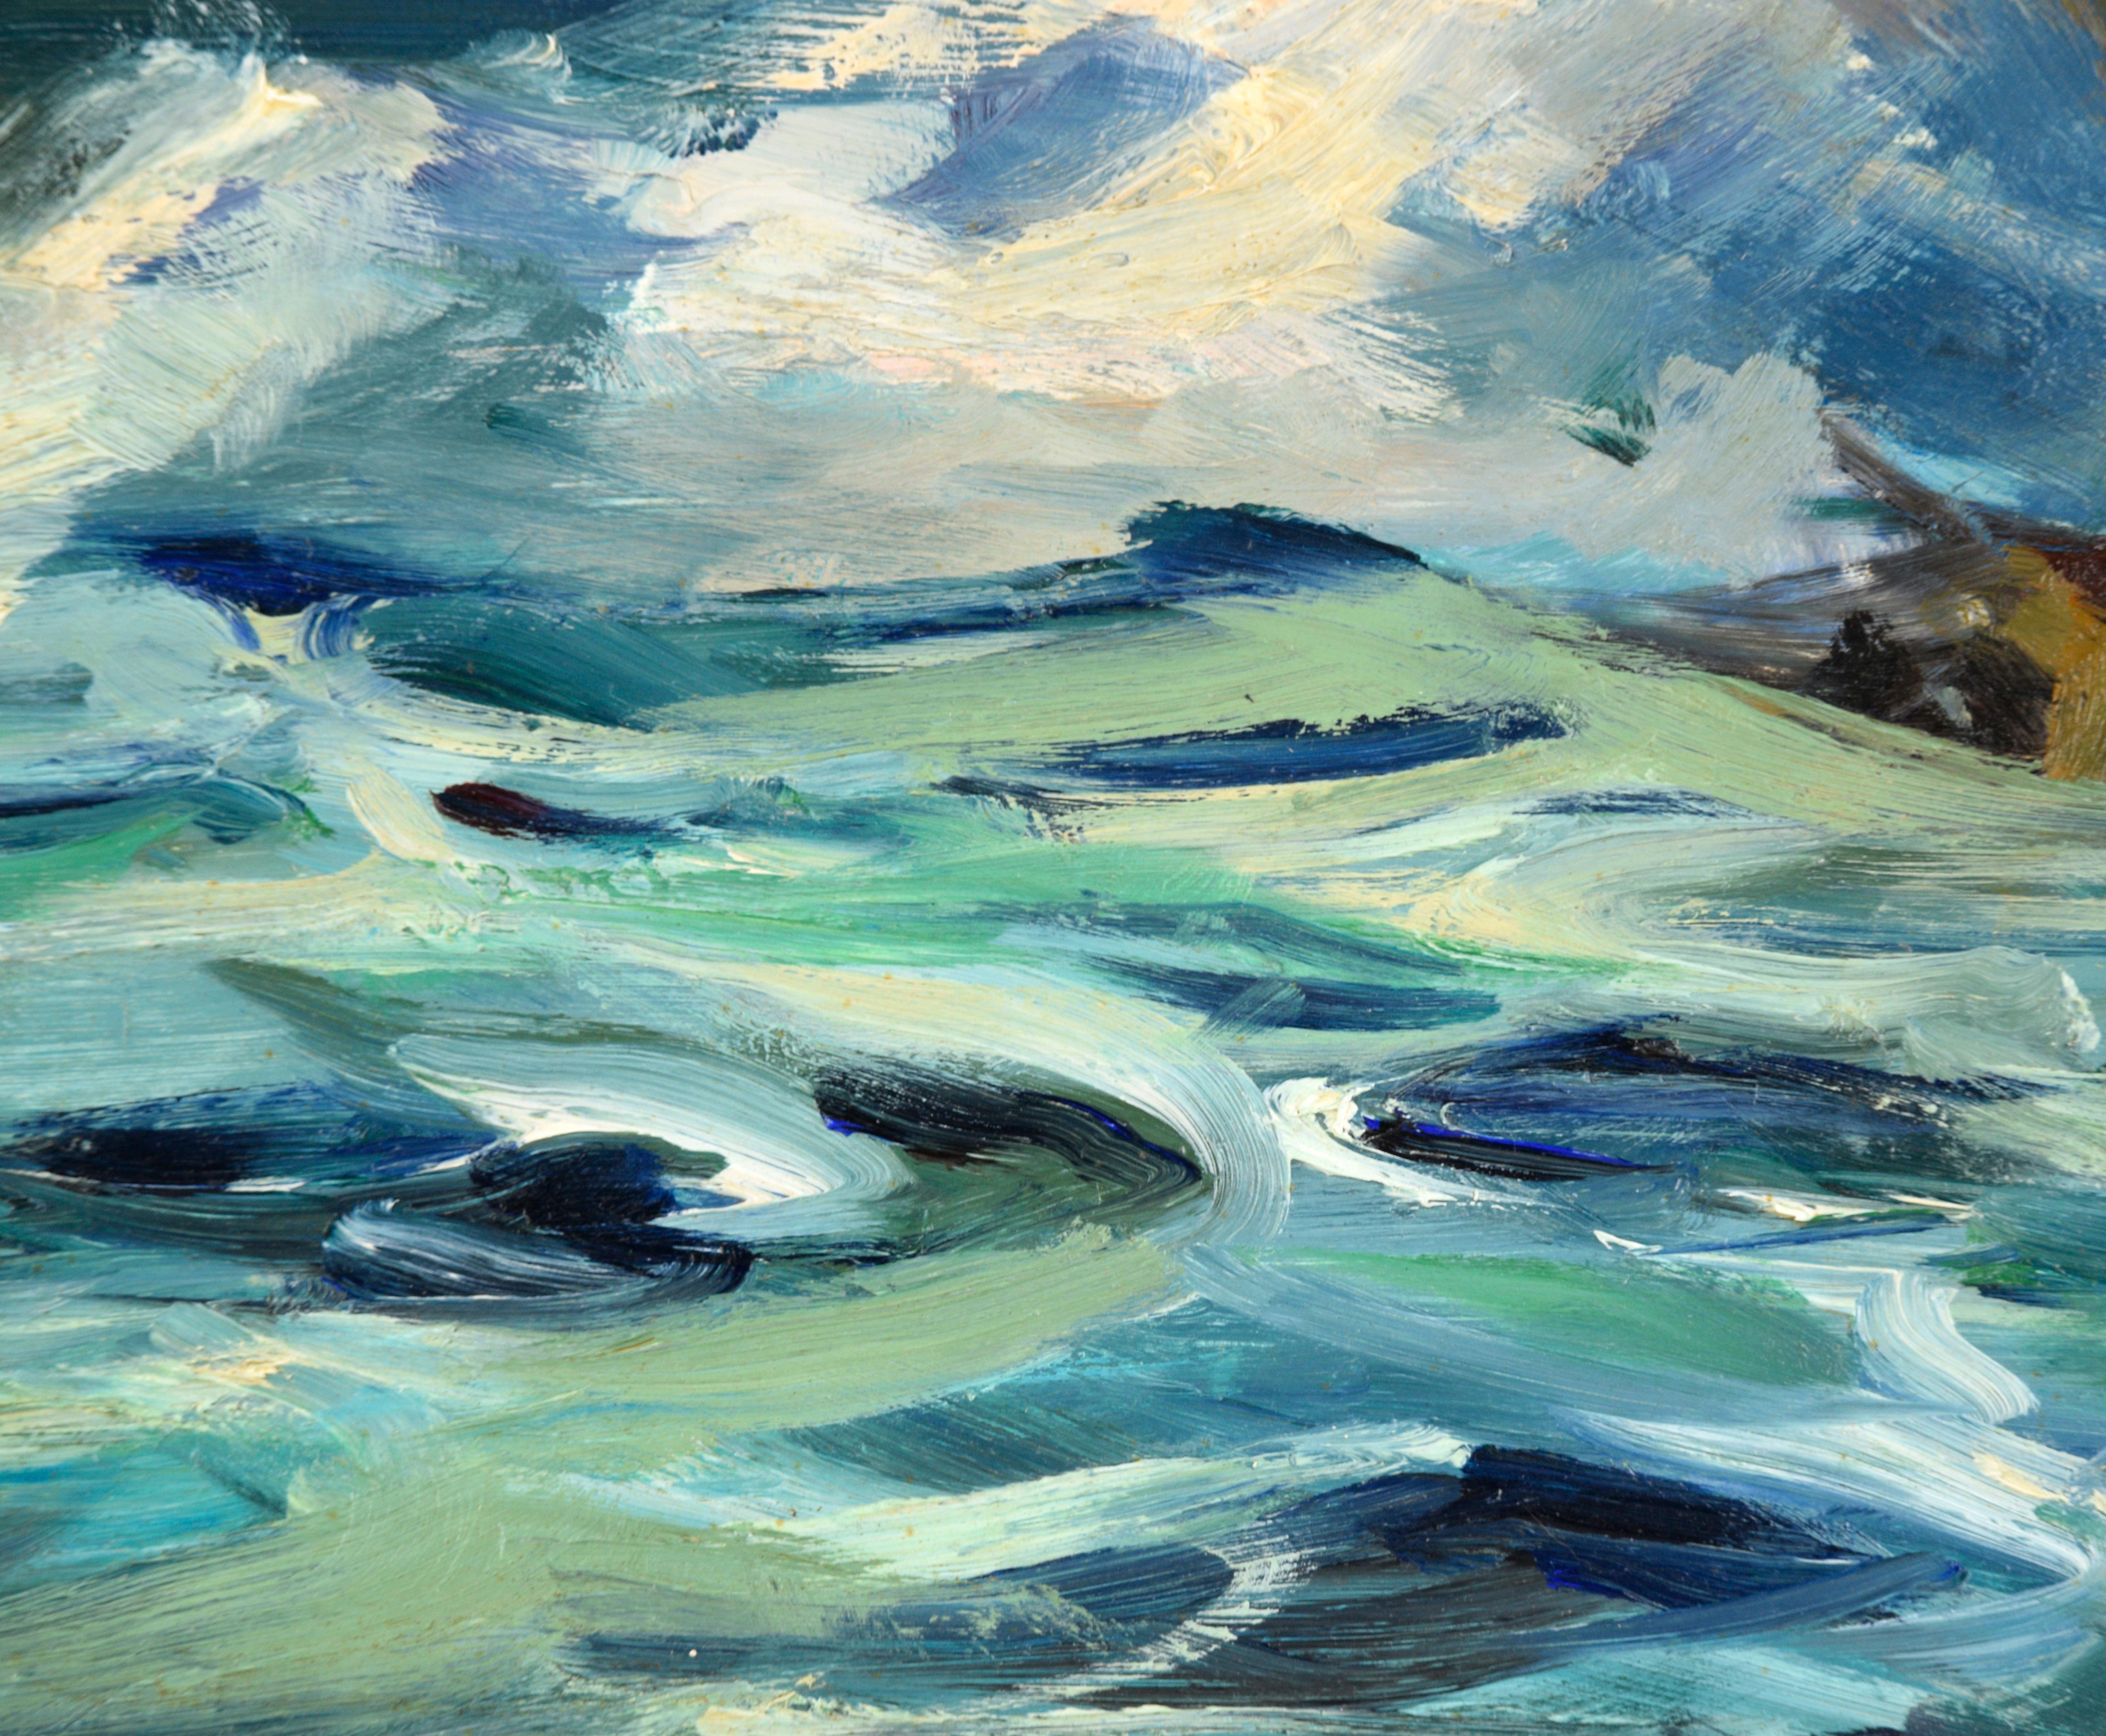 Dramatic and dynamic seascape by listed California artist Joseph Paul Frey (American, 1892 - 1977). Signed 